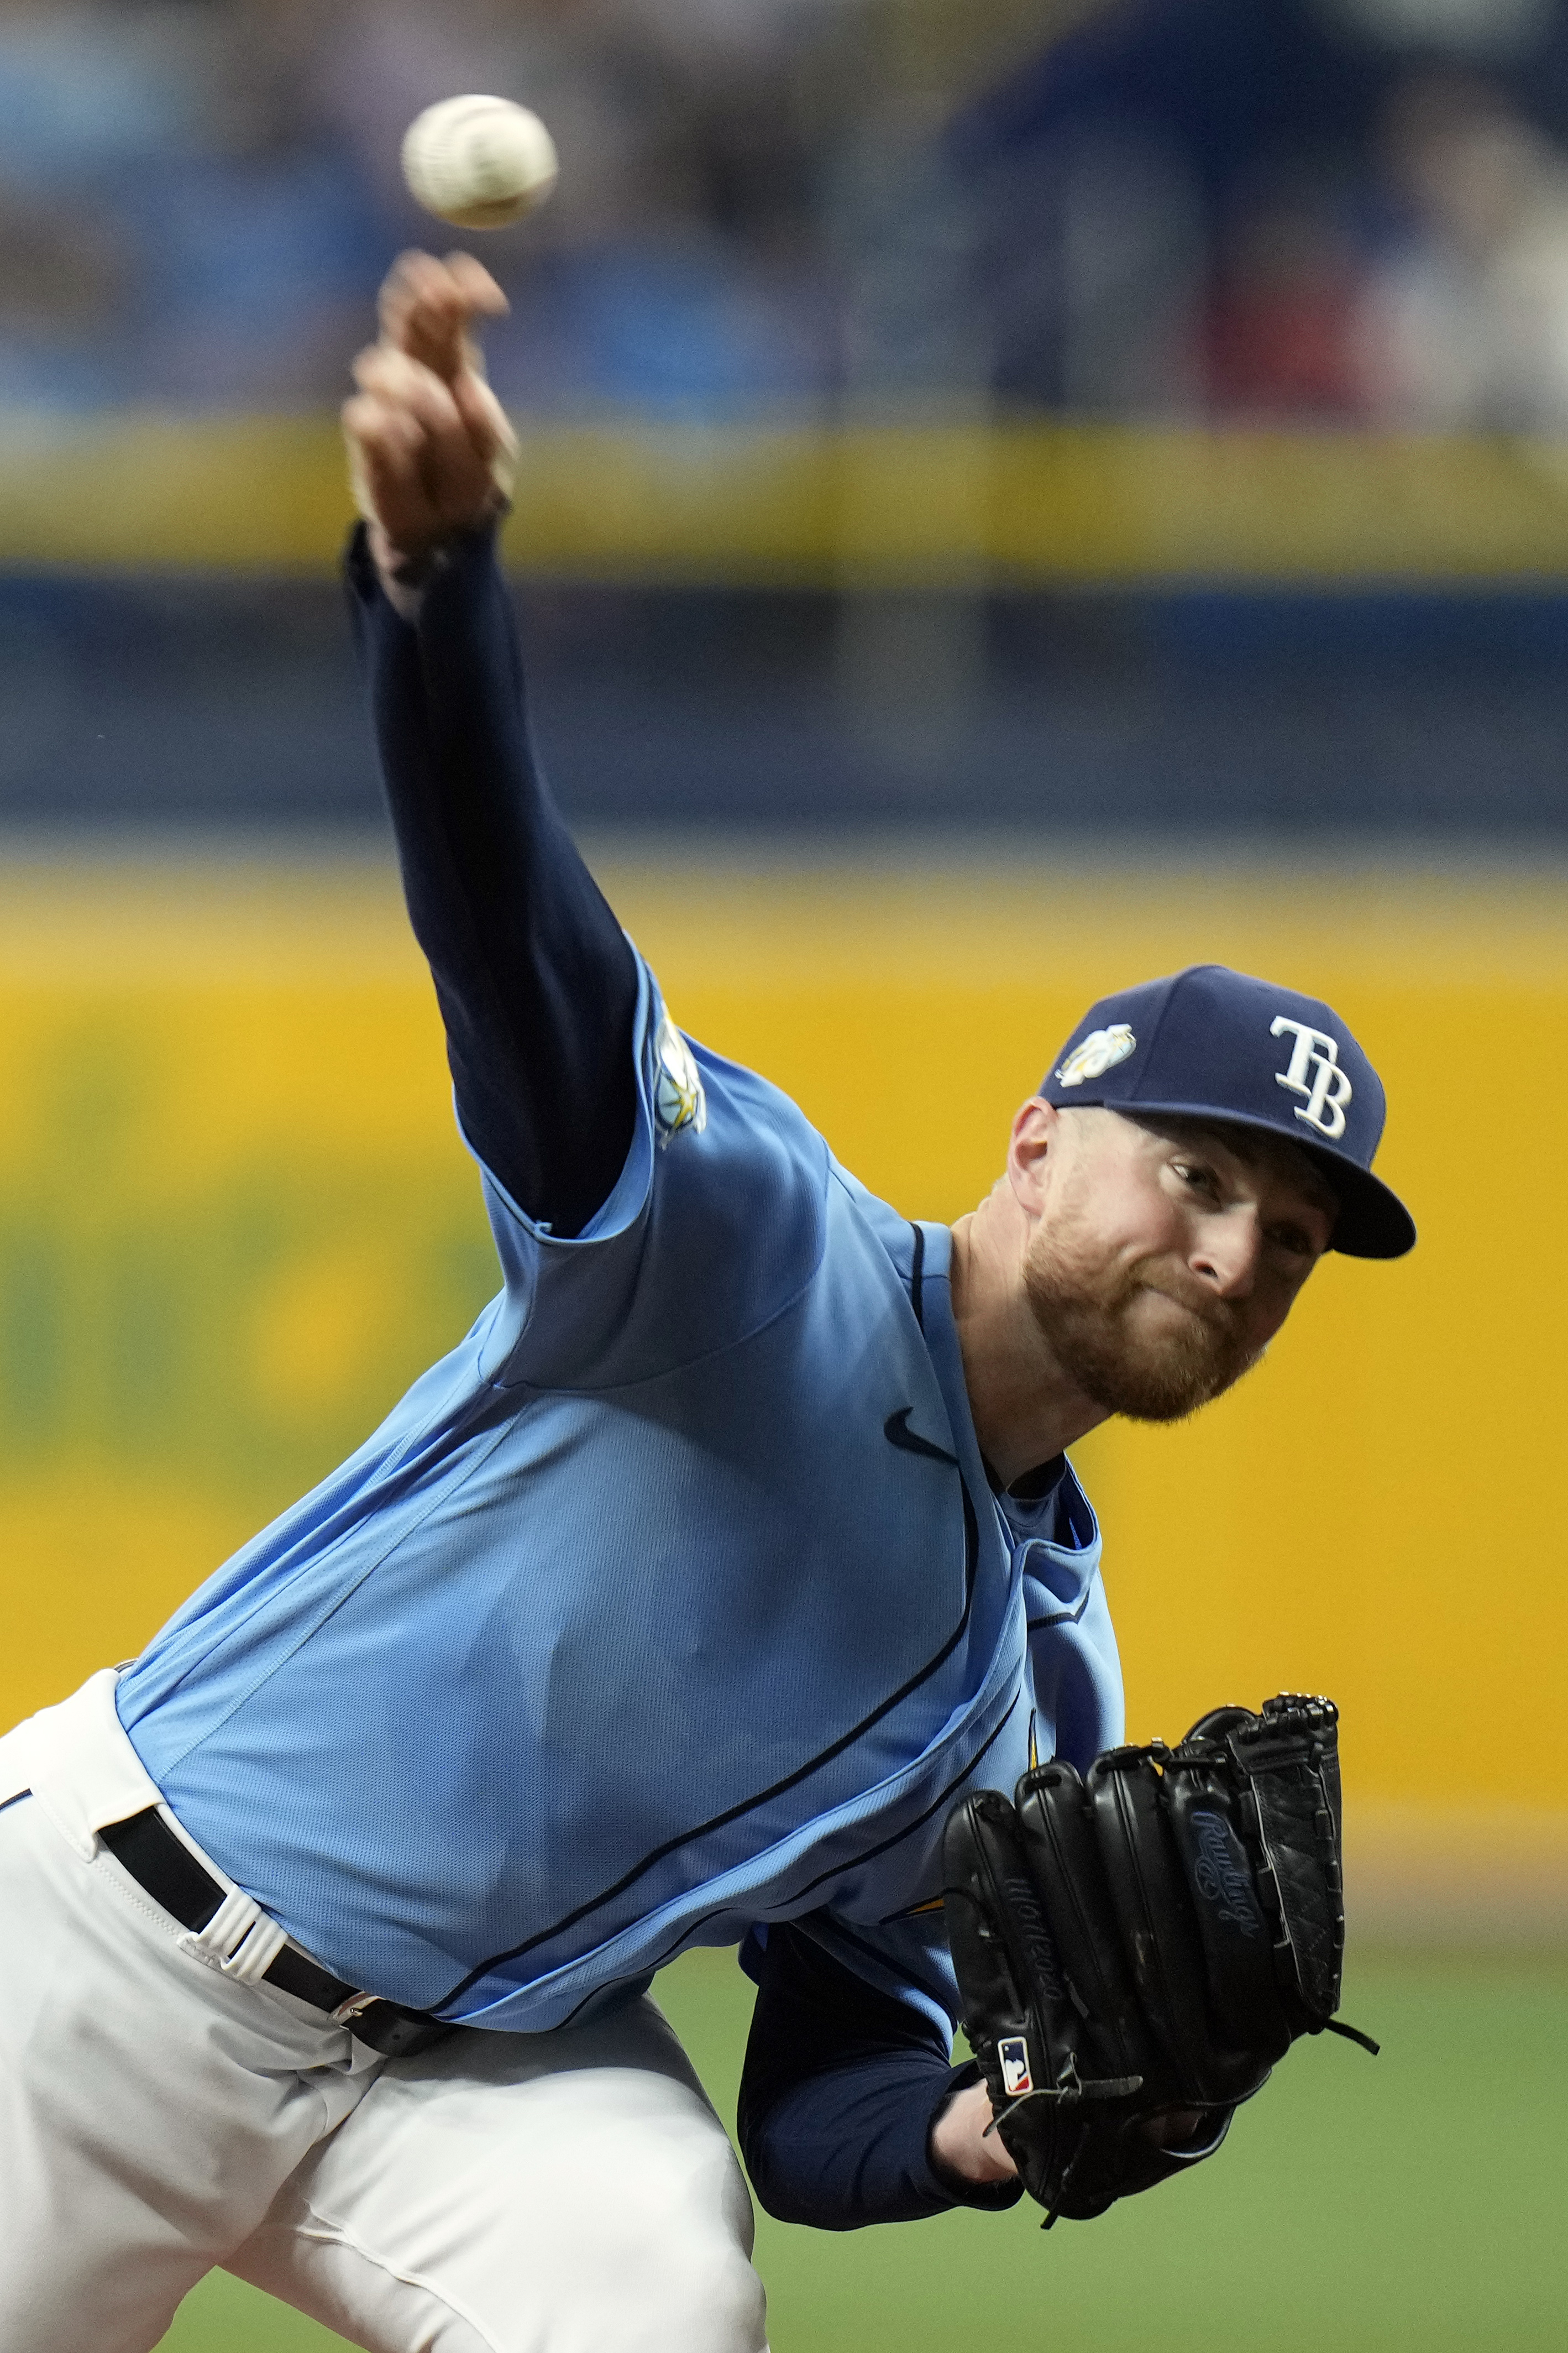 Rays at 9-0, best MLB start since 2003, after 11-0 rout - The San